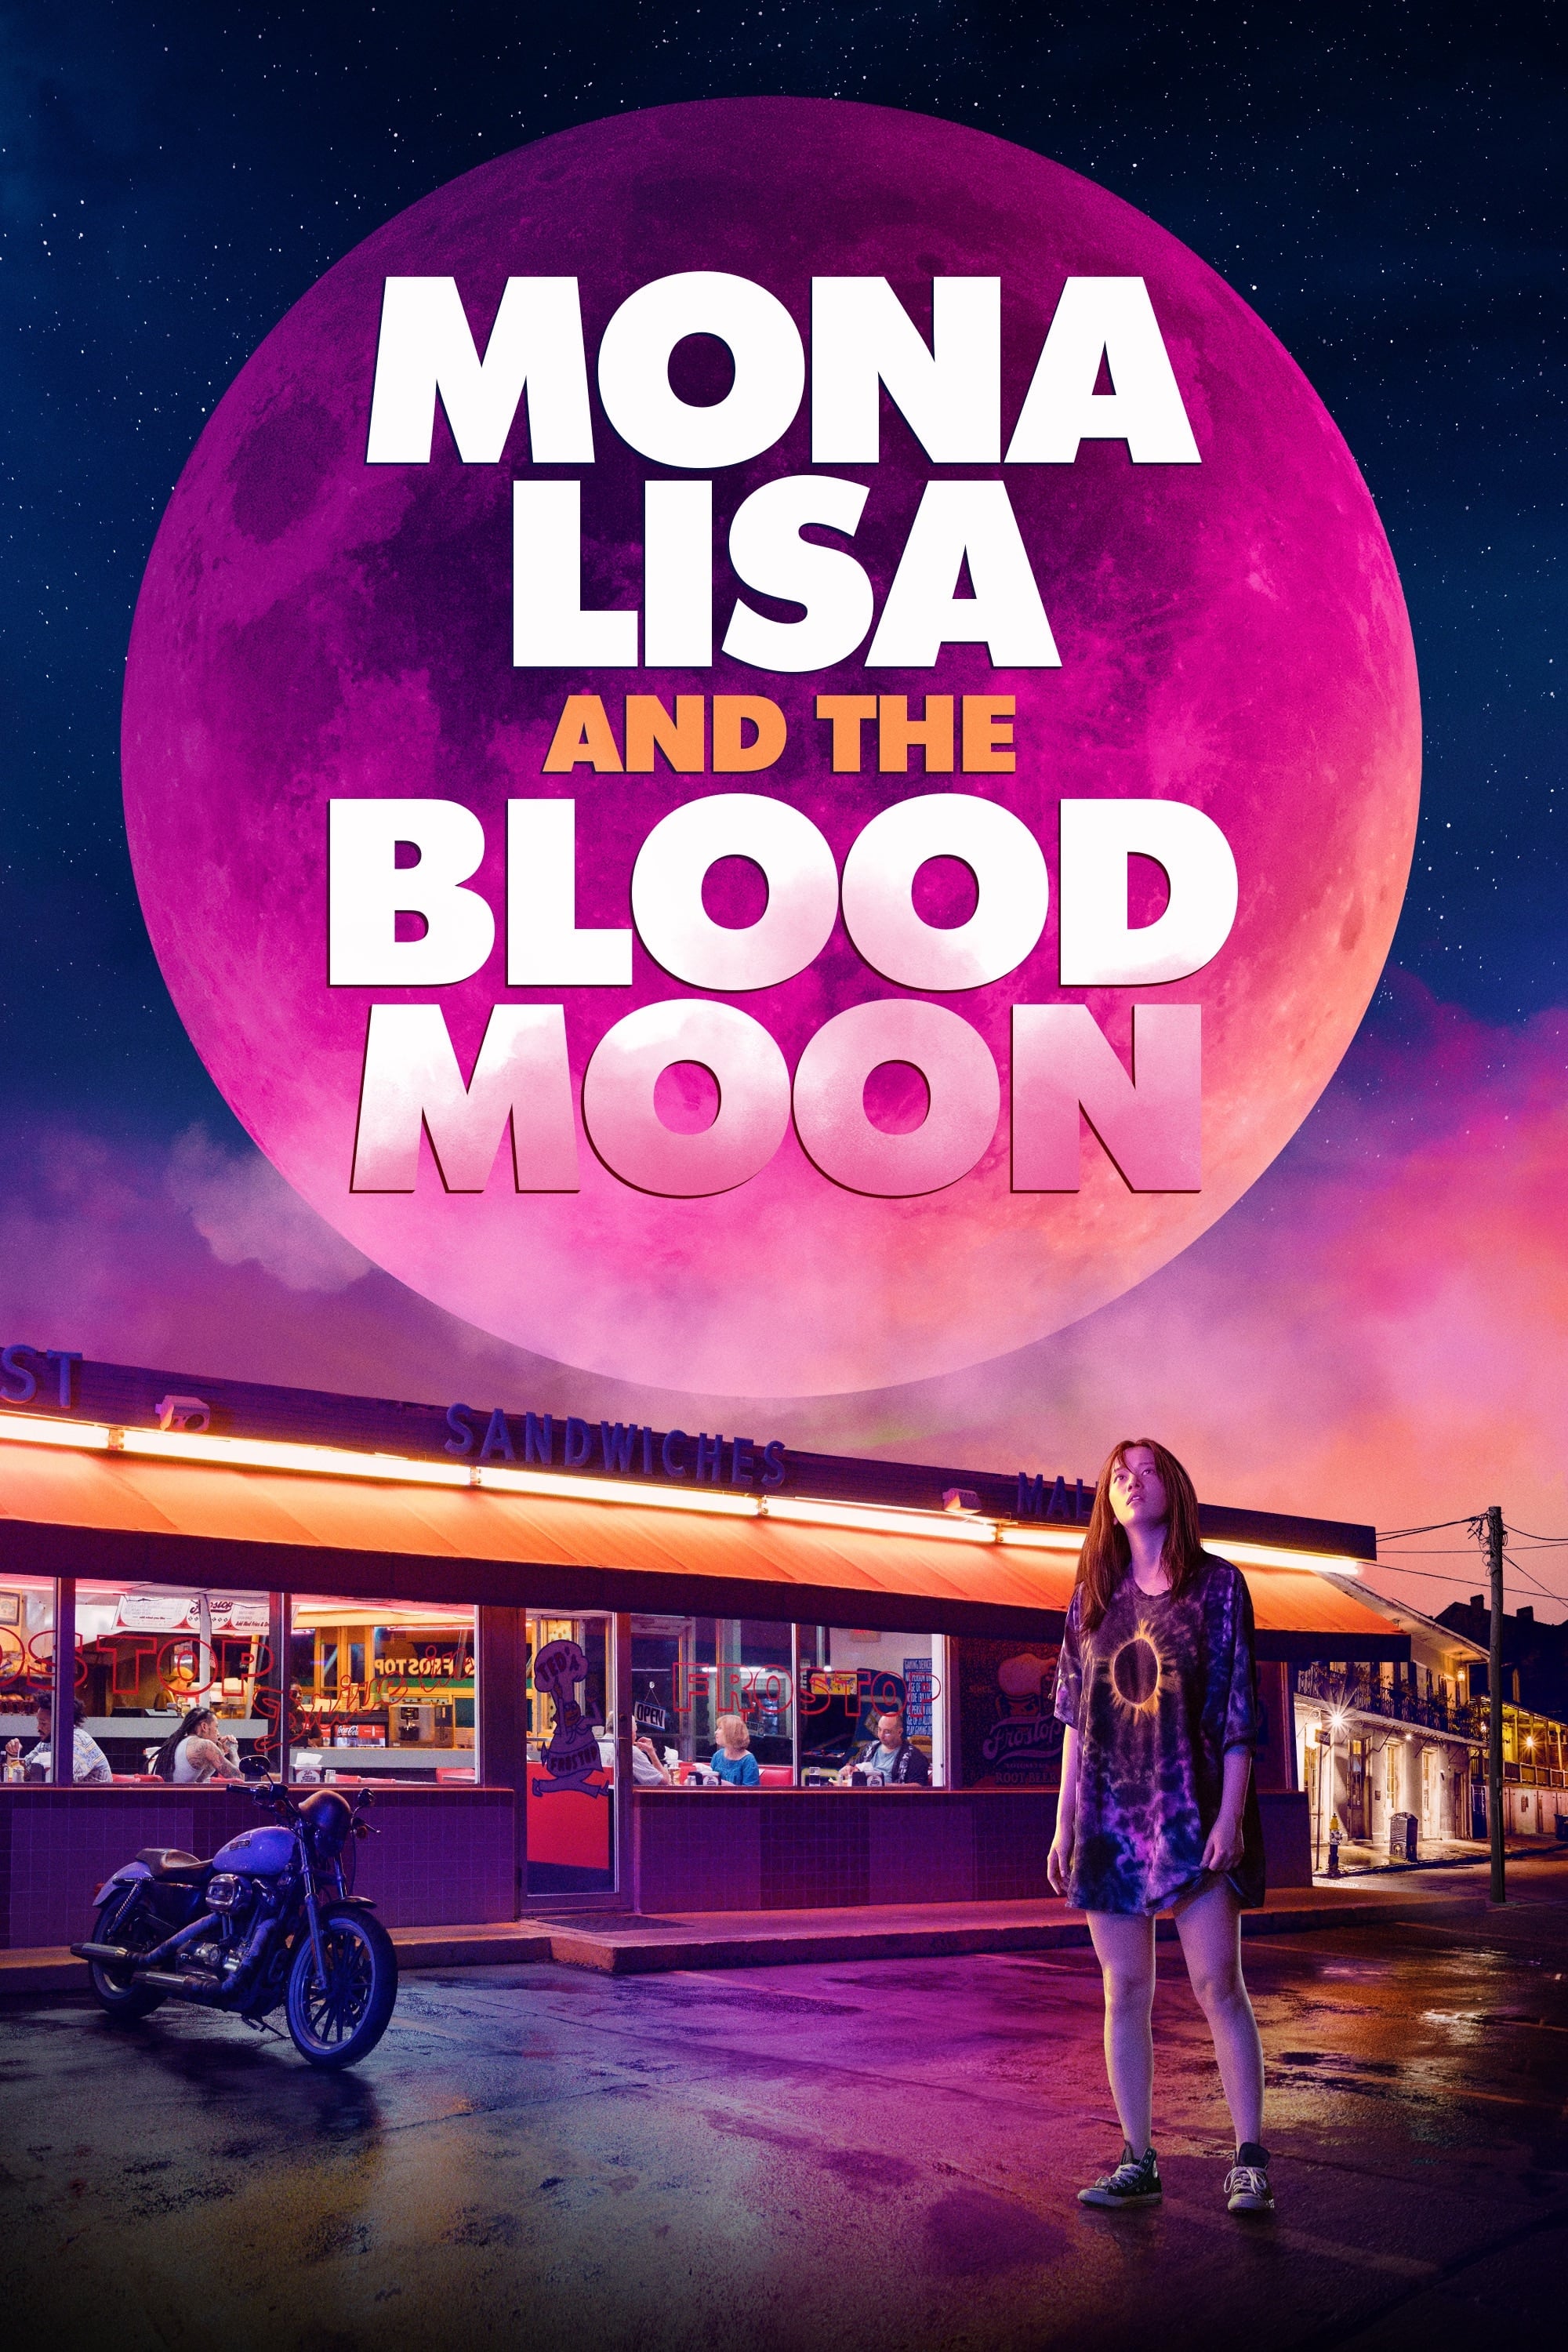 Mona Lisa and the Blood Moon poster